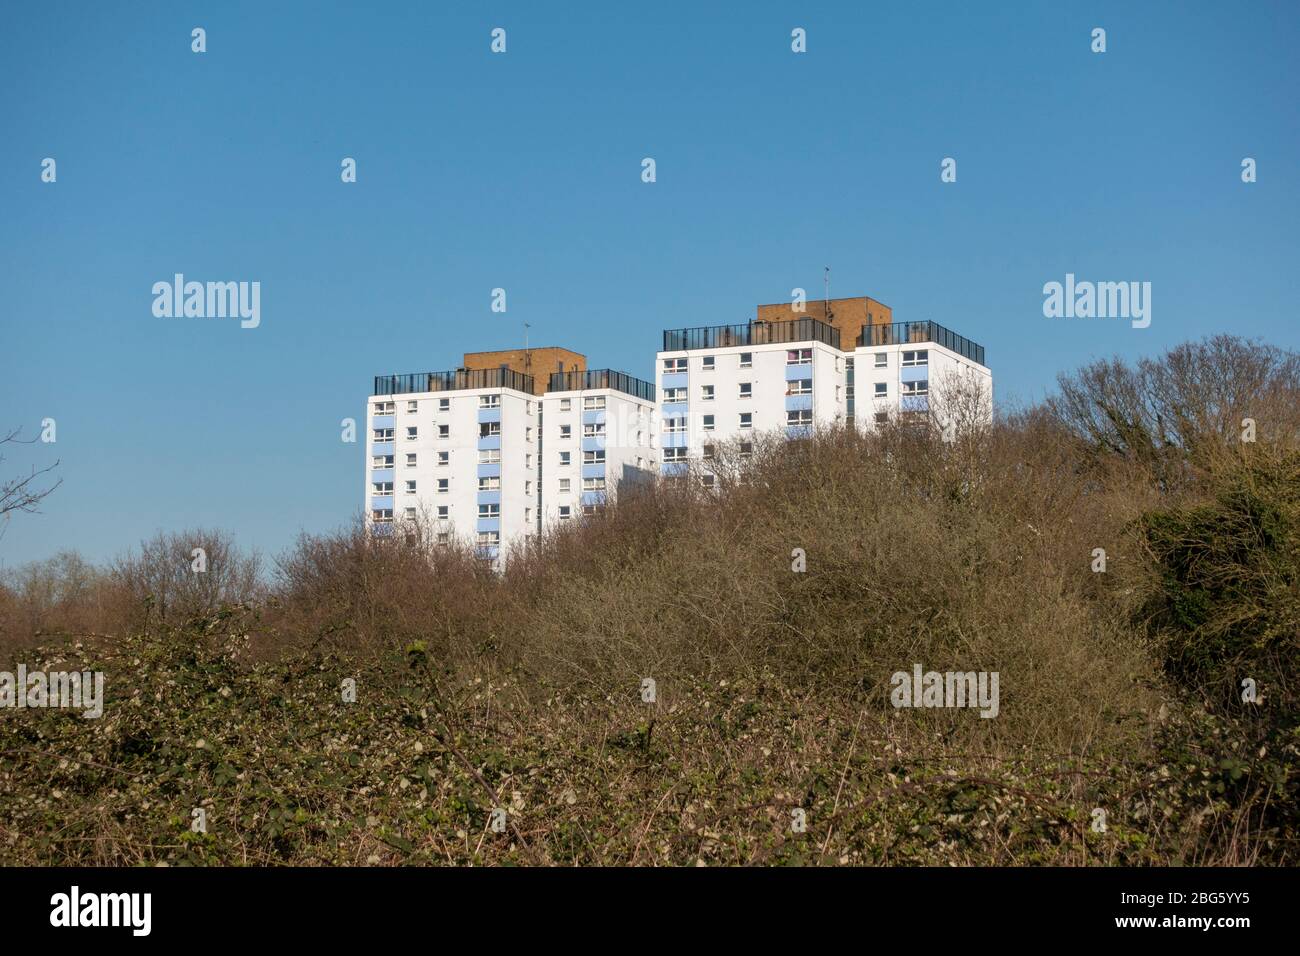 General view towards the towers of Hounslow Heath Estate (Slade House (L) and Jamieson House (R) of Hounslow Heath, London, UK. Stock Photo